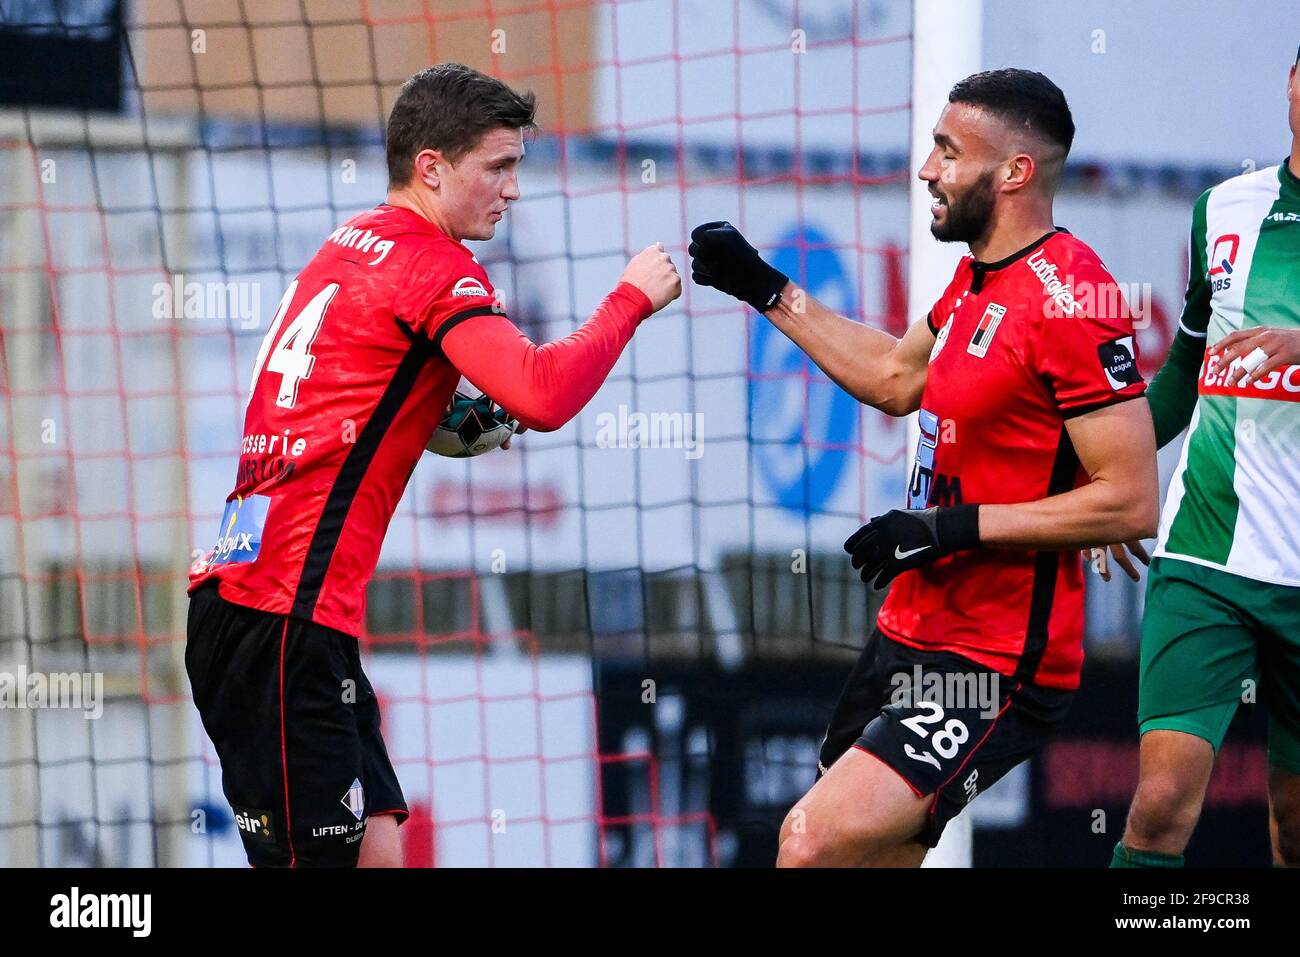 Rwdm S Nicolas Rommens Celebrates After Scoring During A Soccer Match Between Rwdm And Lommel Sk Saturday 17 April 2021 In Brussels On Day 27 Of The Stock Photo Alamy